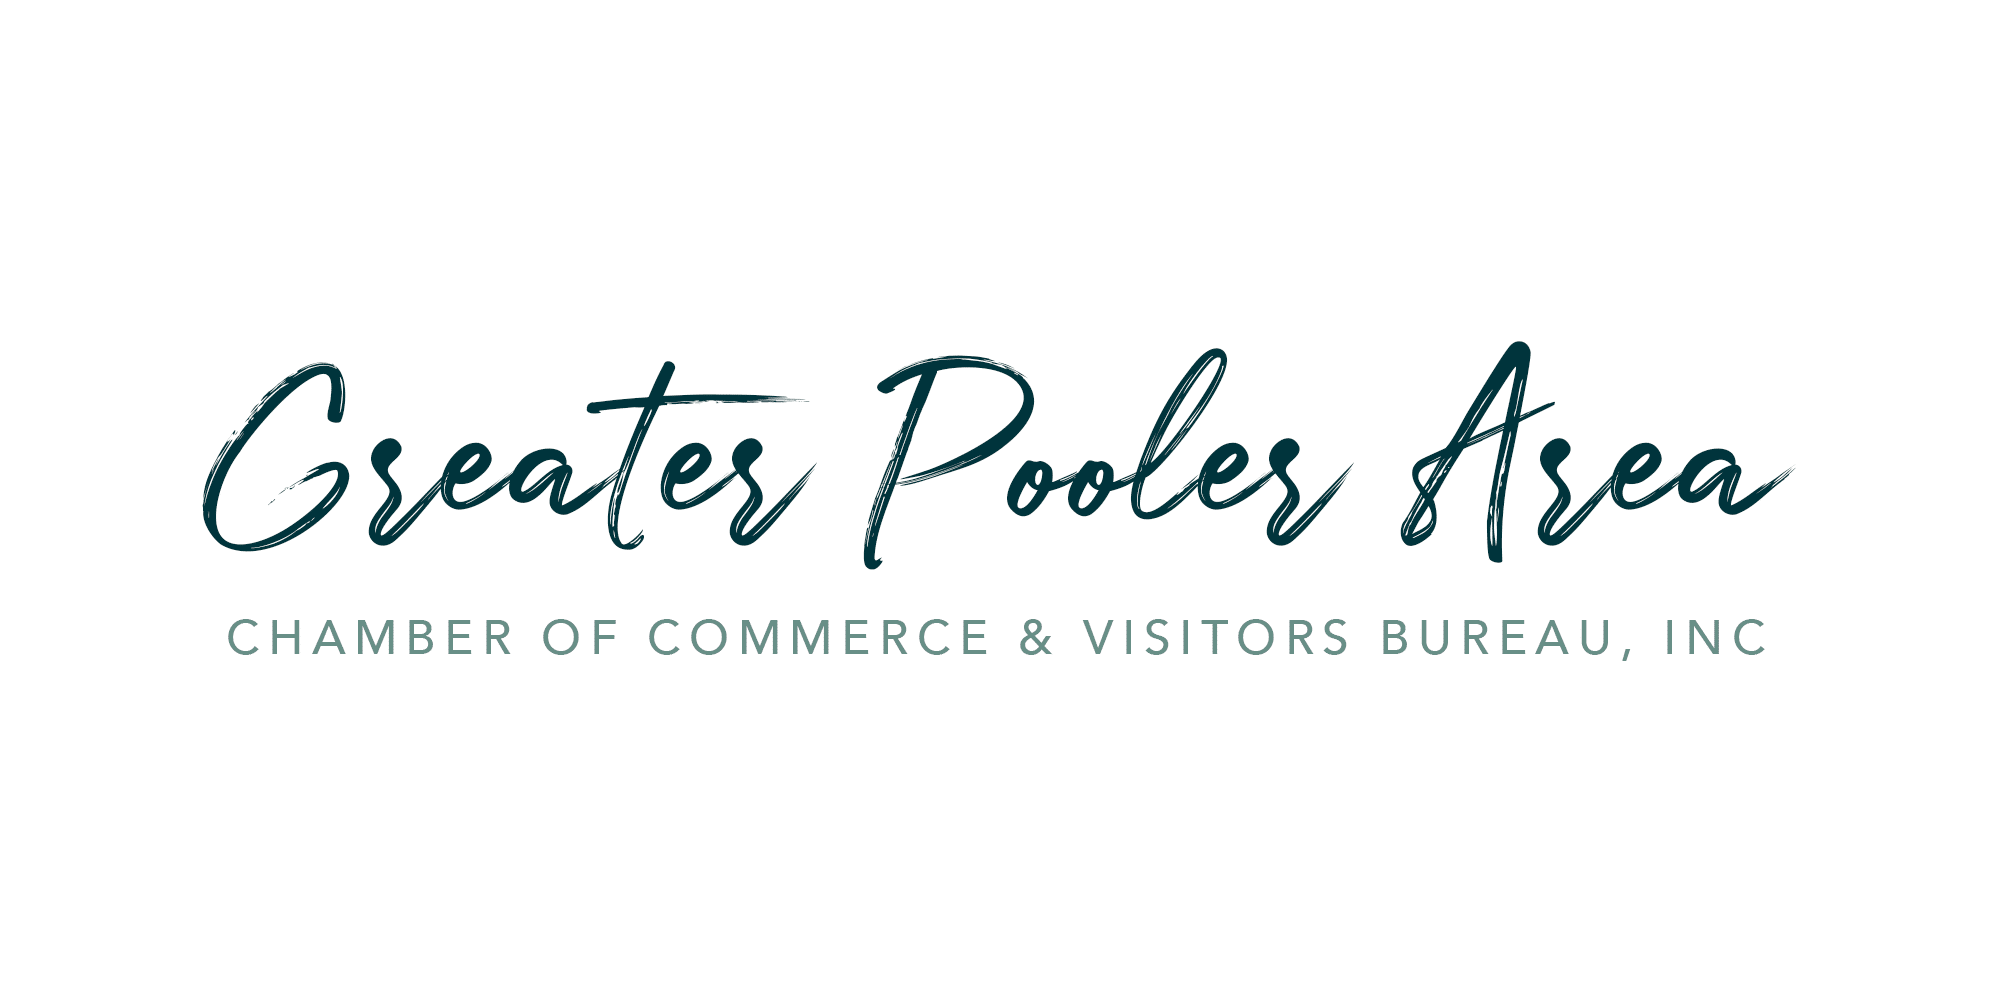 Greater Pooler Area Chamber of Commerce & Visitors Bureau, INC